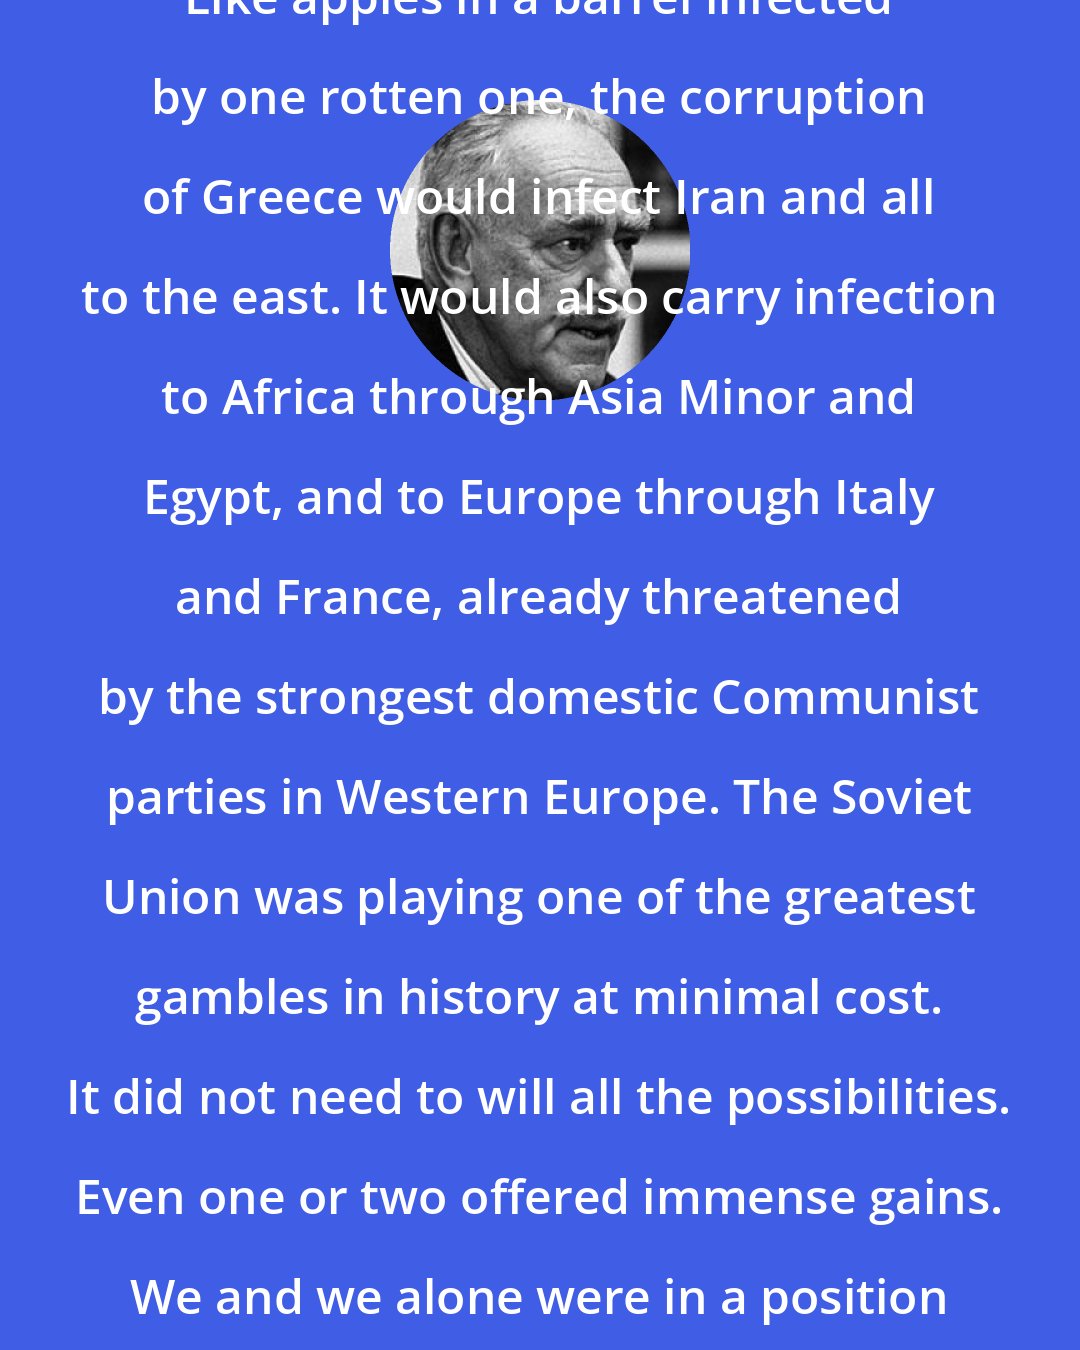 Dean Acheson: Like apples in a barrel infected by one rotten one, the corruption of Greece would infect Iran and all to the east. It would also carry infection to Africa through Asia Minor and Egypt, and to Europe through Italy and France, already threatened by the strongest domestic Communist parties in Western Europe. The Soviet Union was playing one of the greatest gambles in history at minimal cost. It did not need to will all the possibilities. Even one or two offered immense gains. We and we alone were in a position to break up the play.